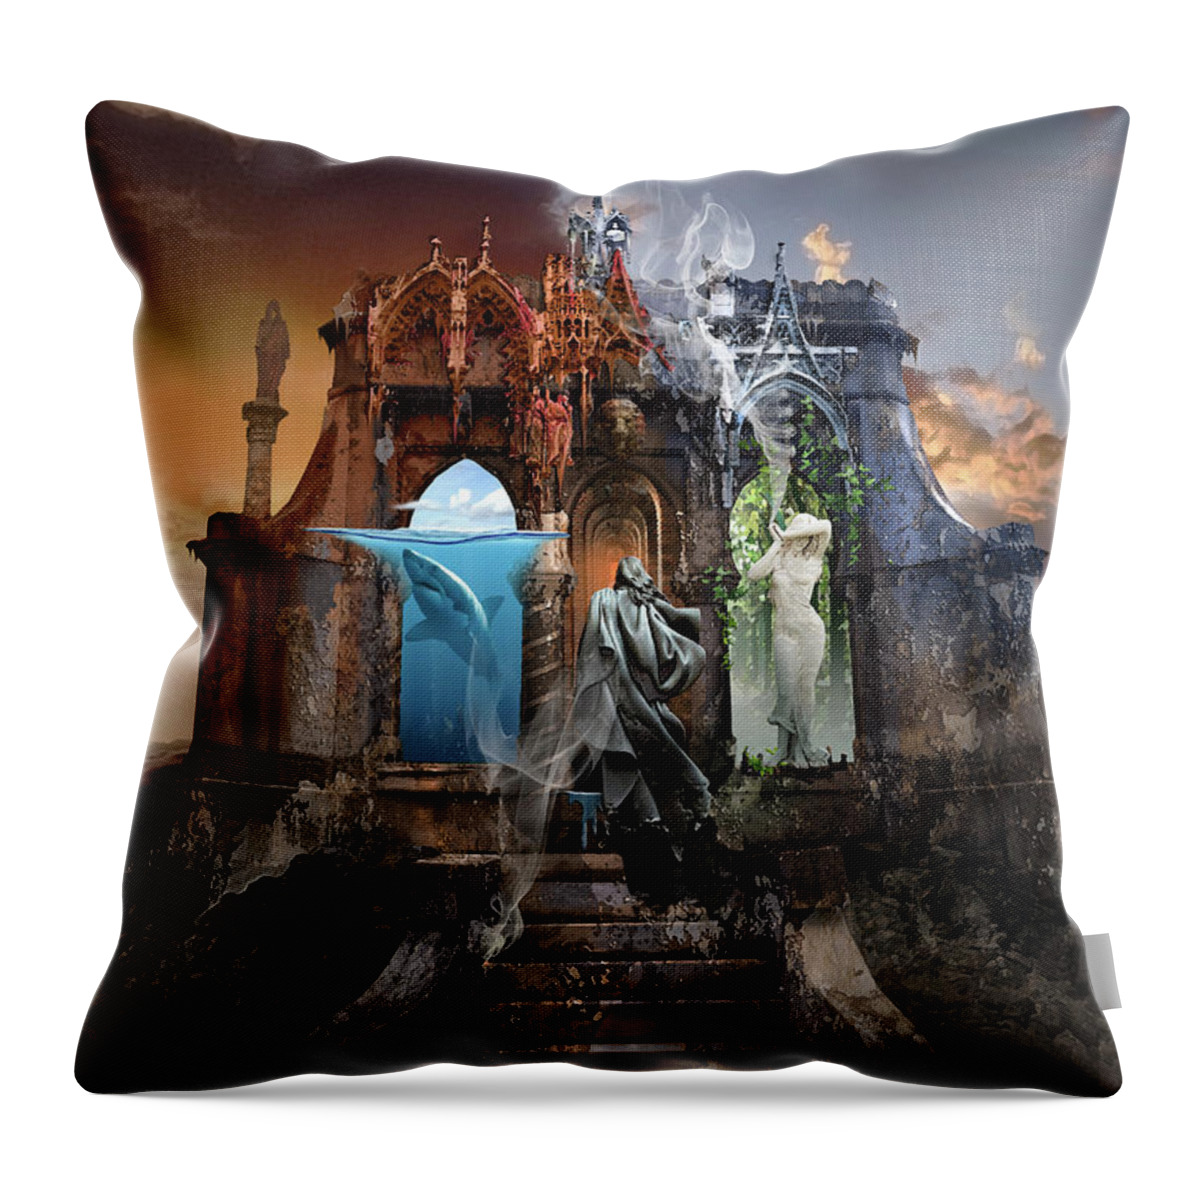 Life Throw Pillow featuring the digital art Self Reincarnation by George Grie